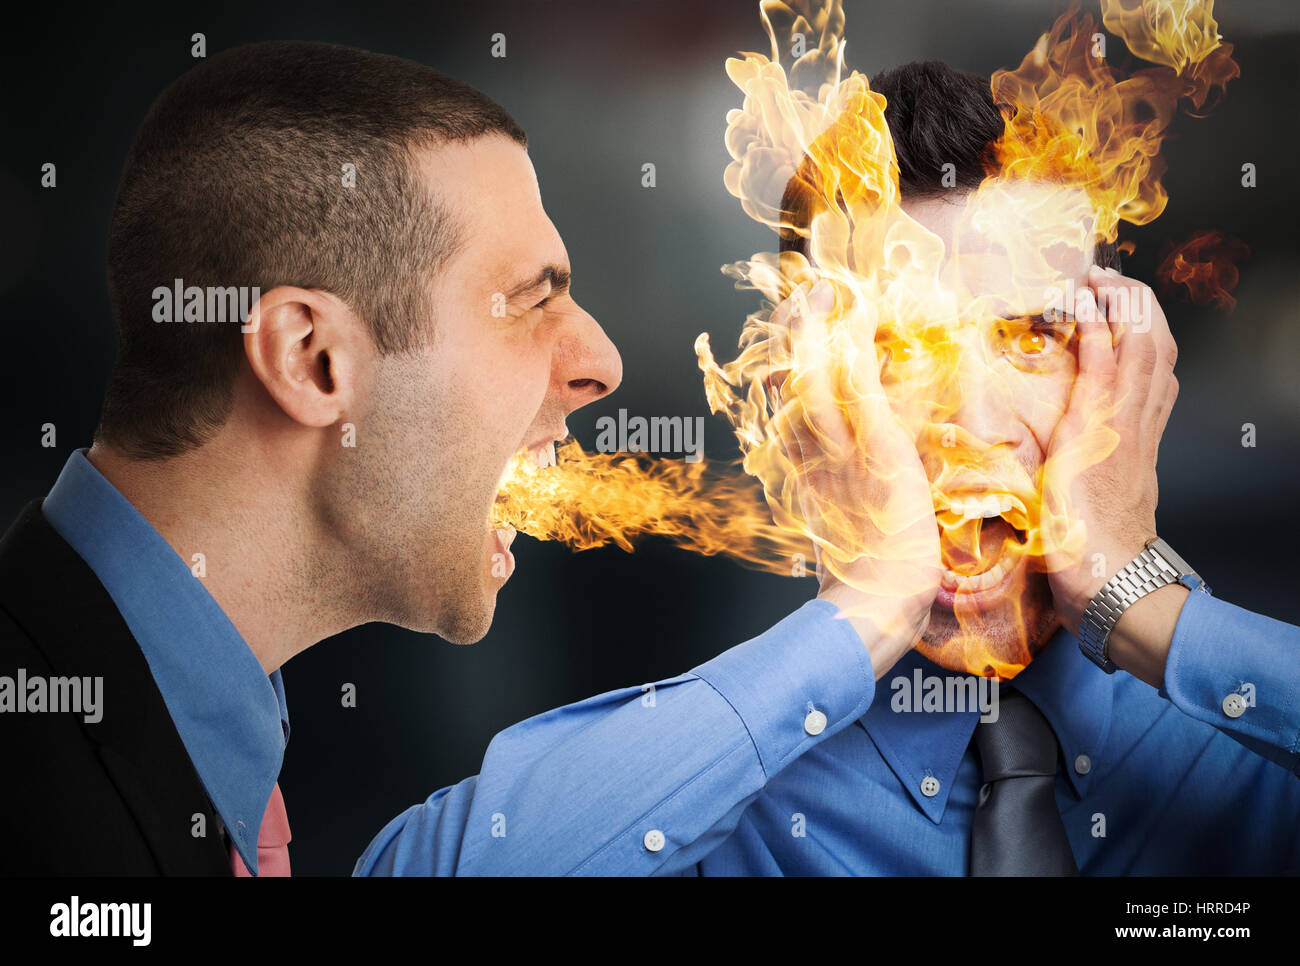 You are fired! Stock Photo